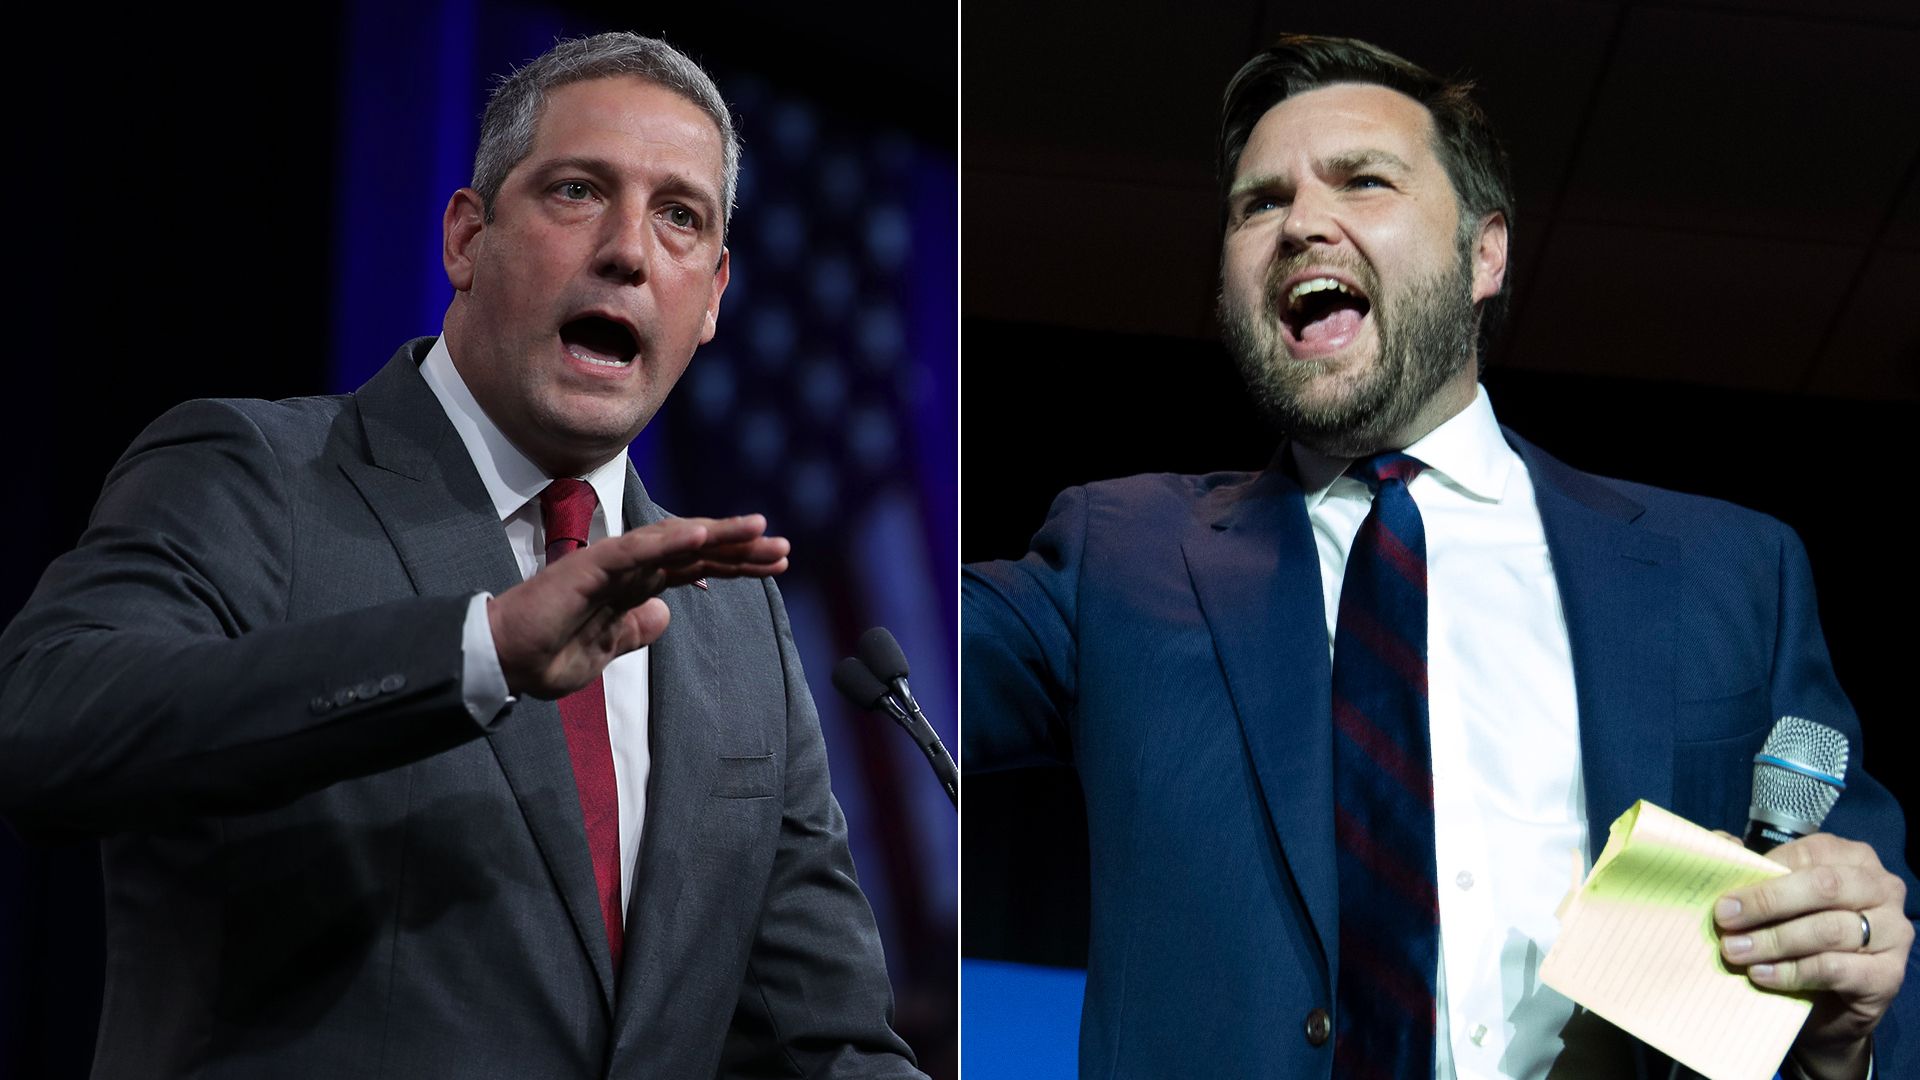 Side-by-side photos of Ohio Senate candidates Rep. Tim Ryan and J.D. Vance speaking.